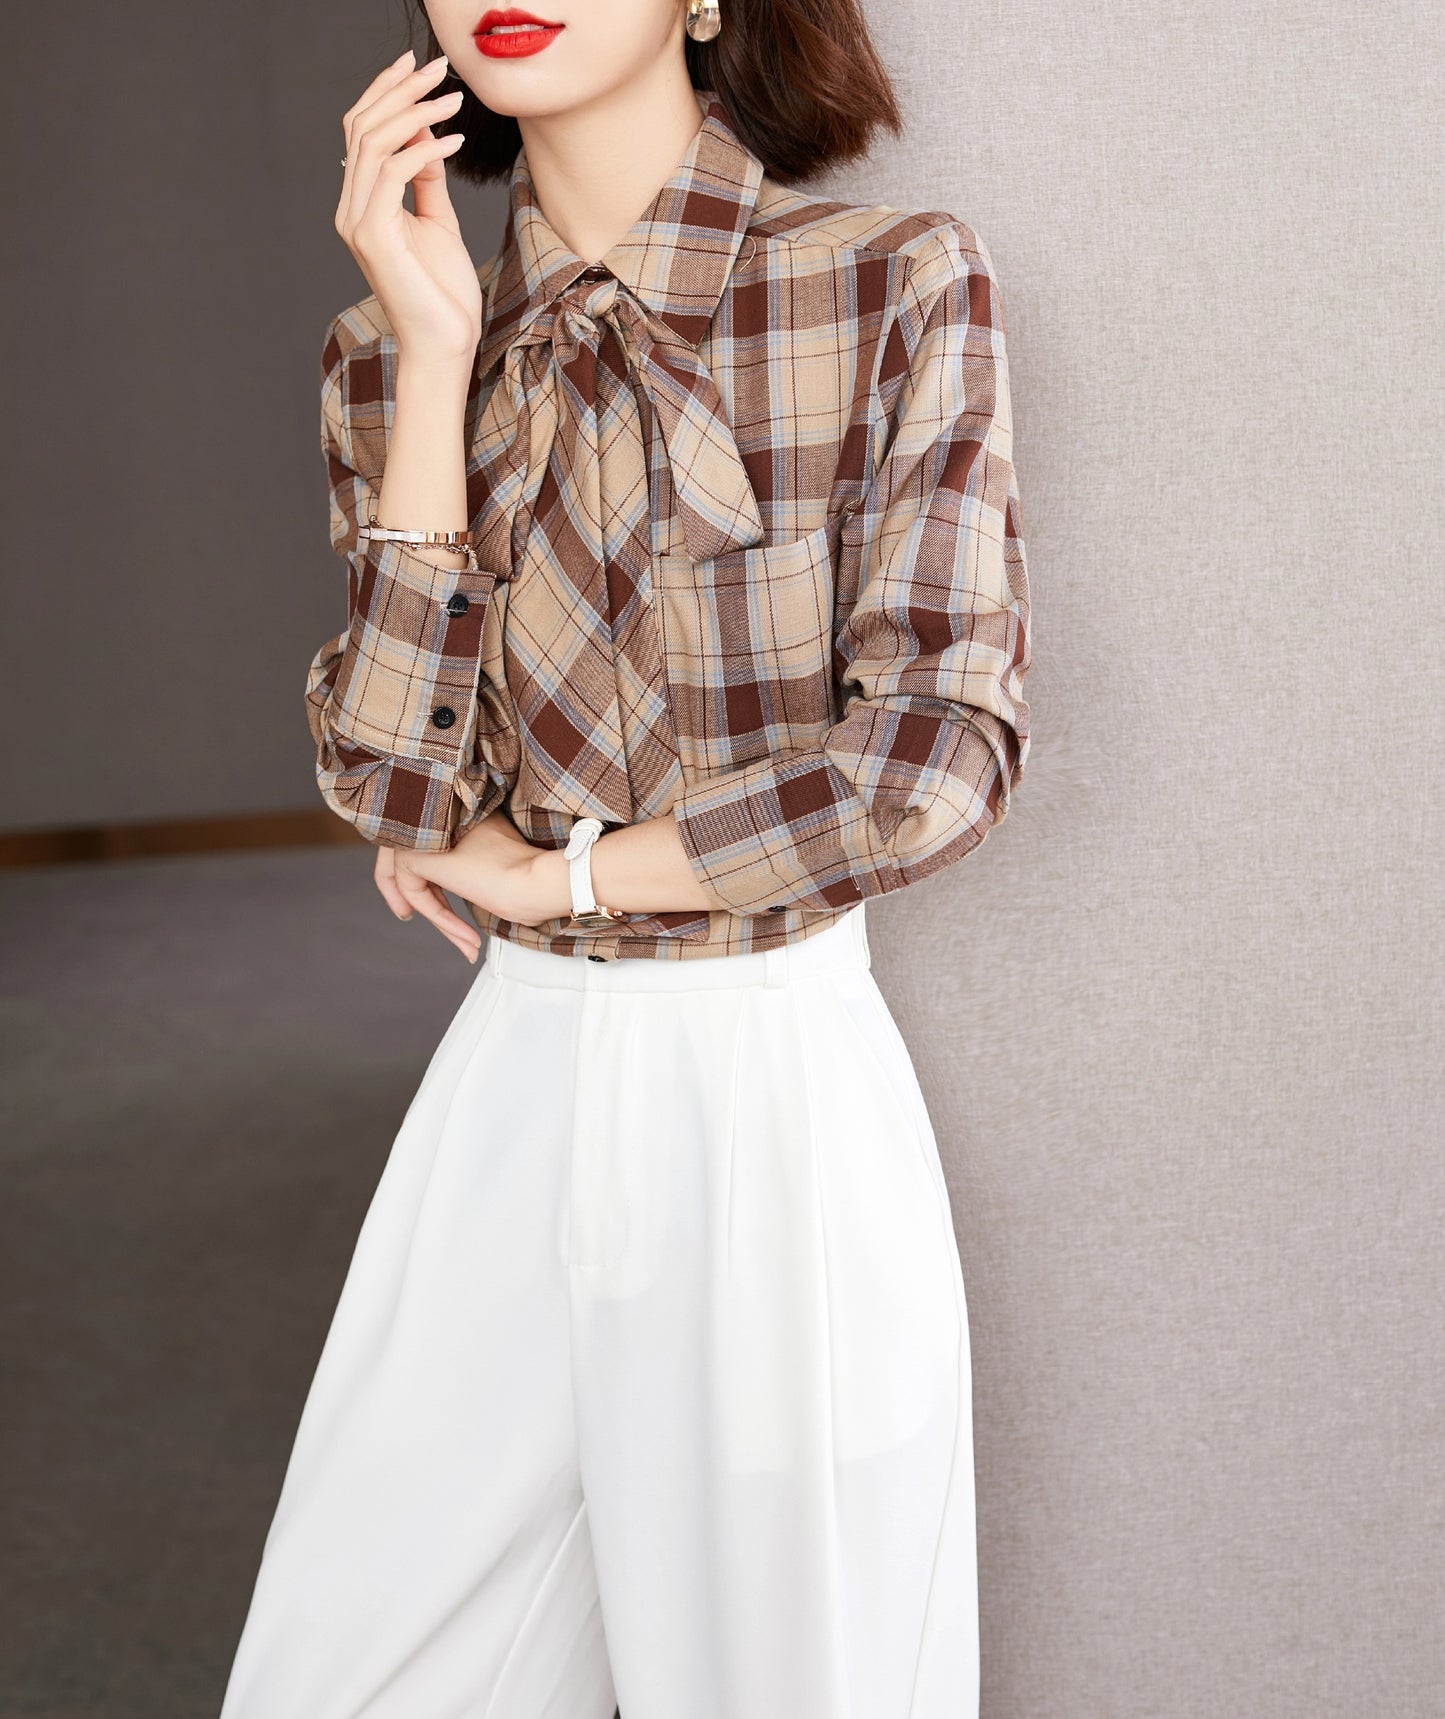 Ladies Plaid Blouse with Bow Tie